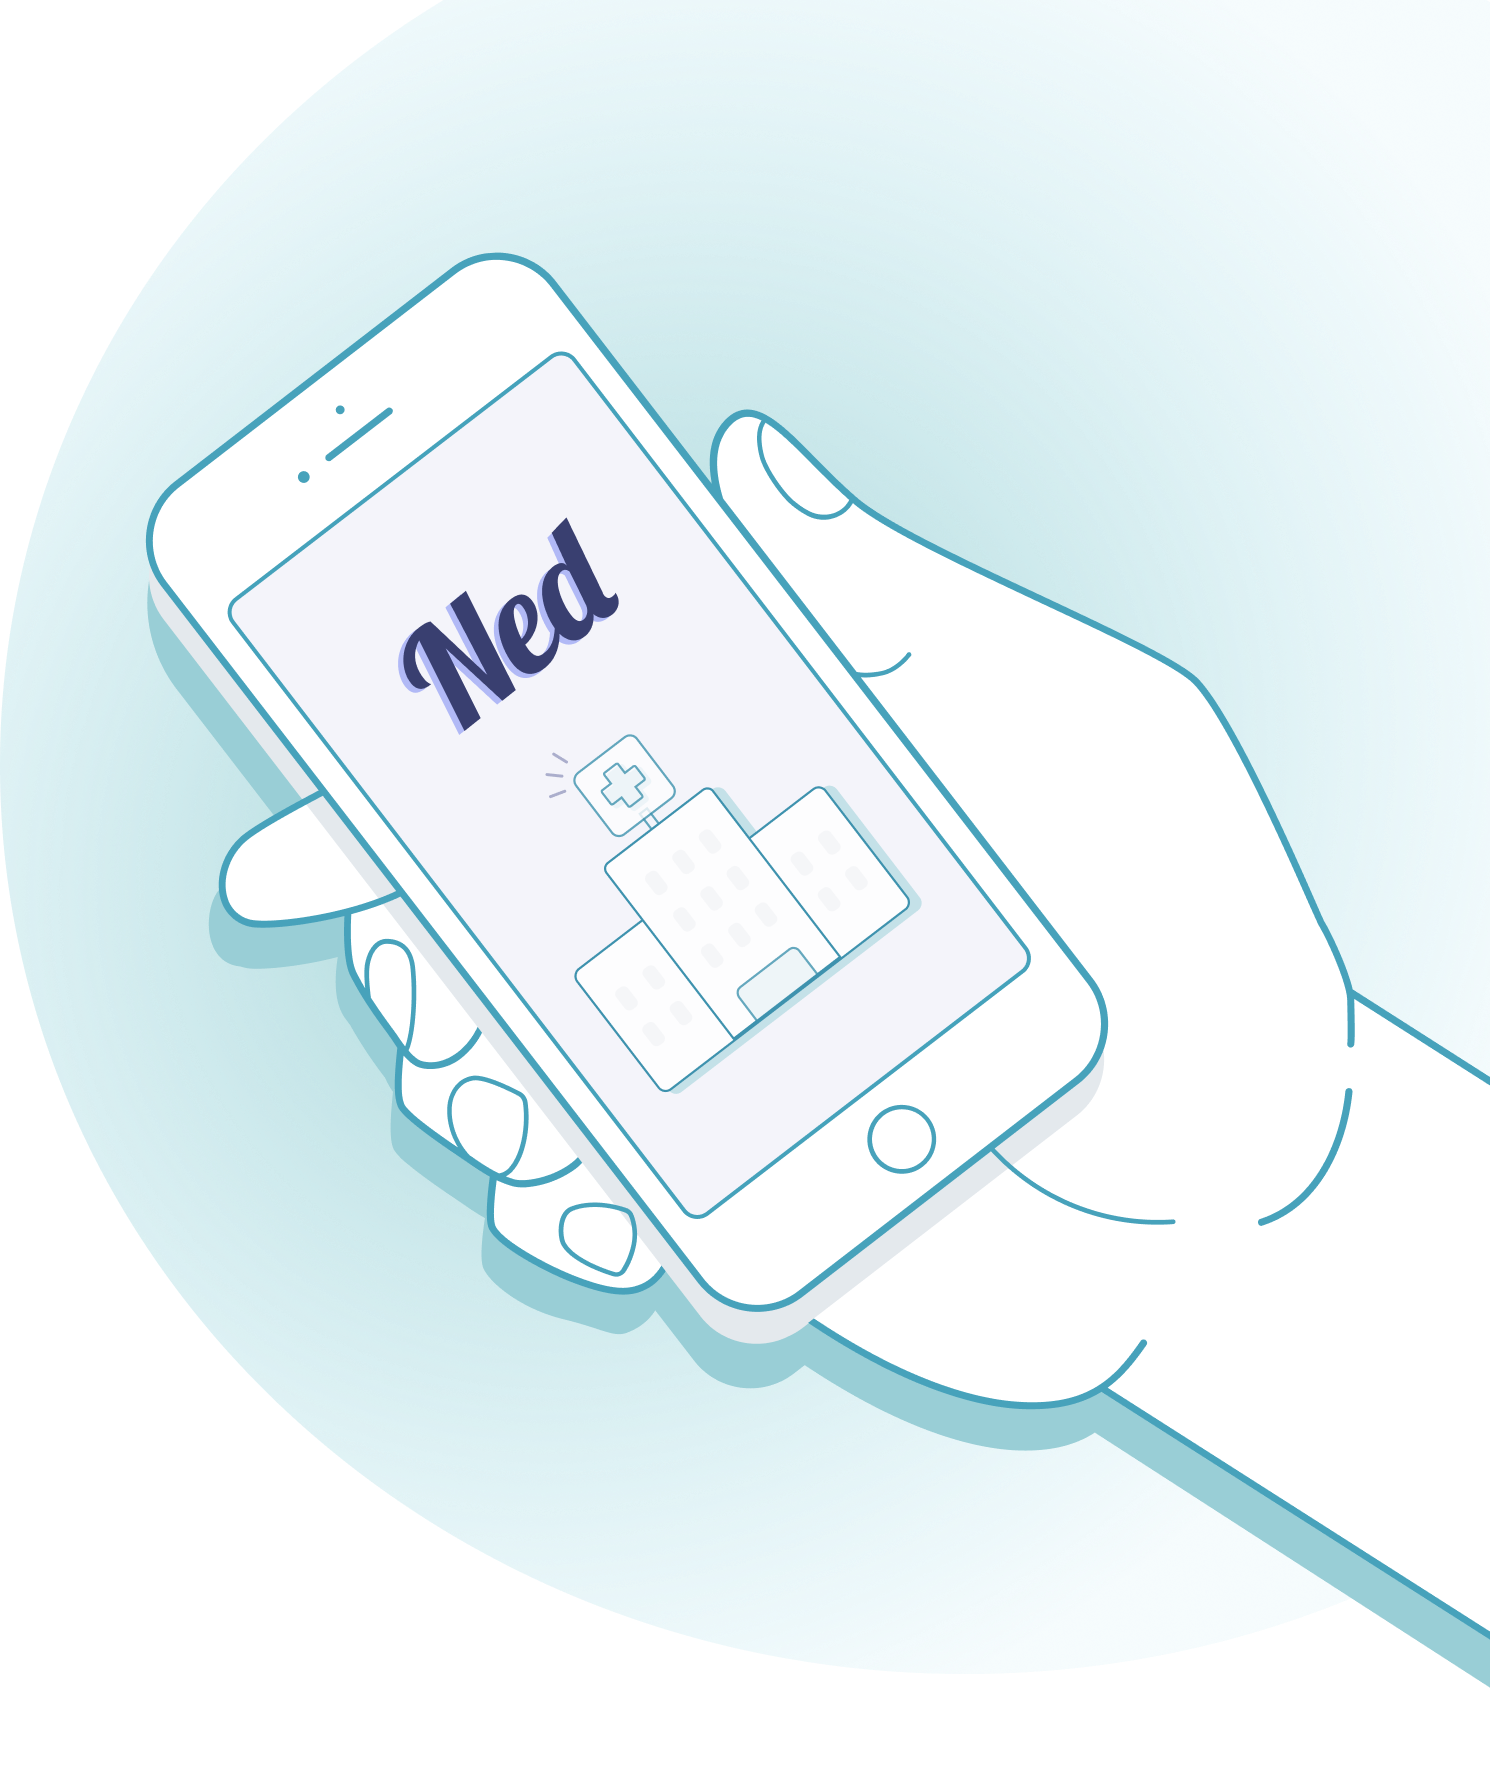 This is an illustration of a hand holding a phone with the Ned logo on it.